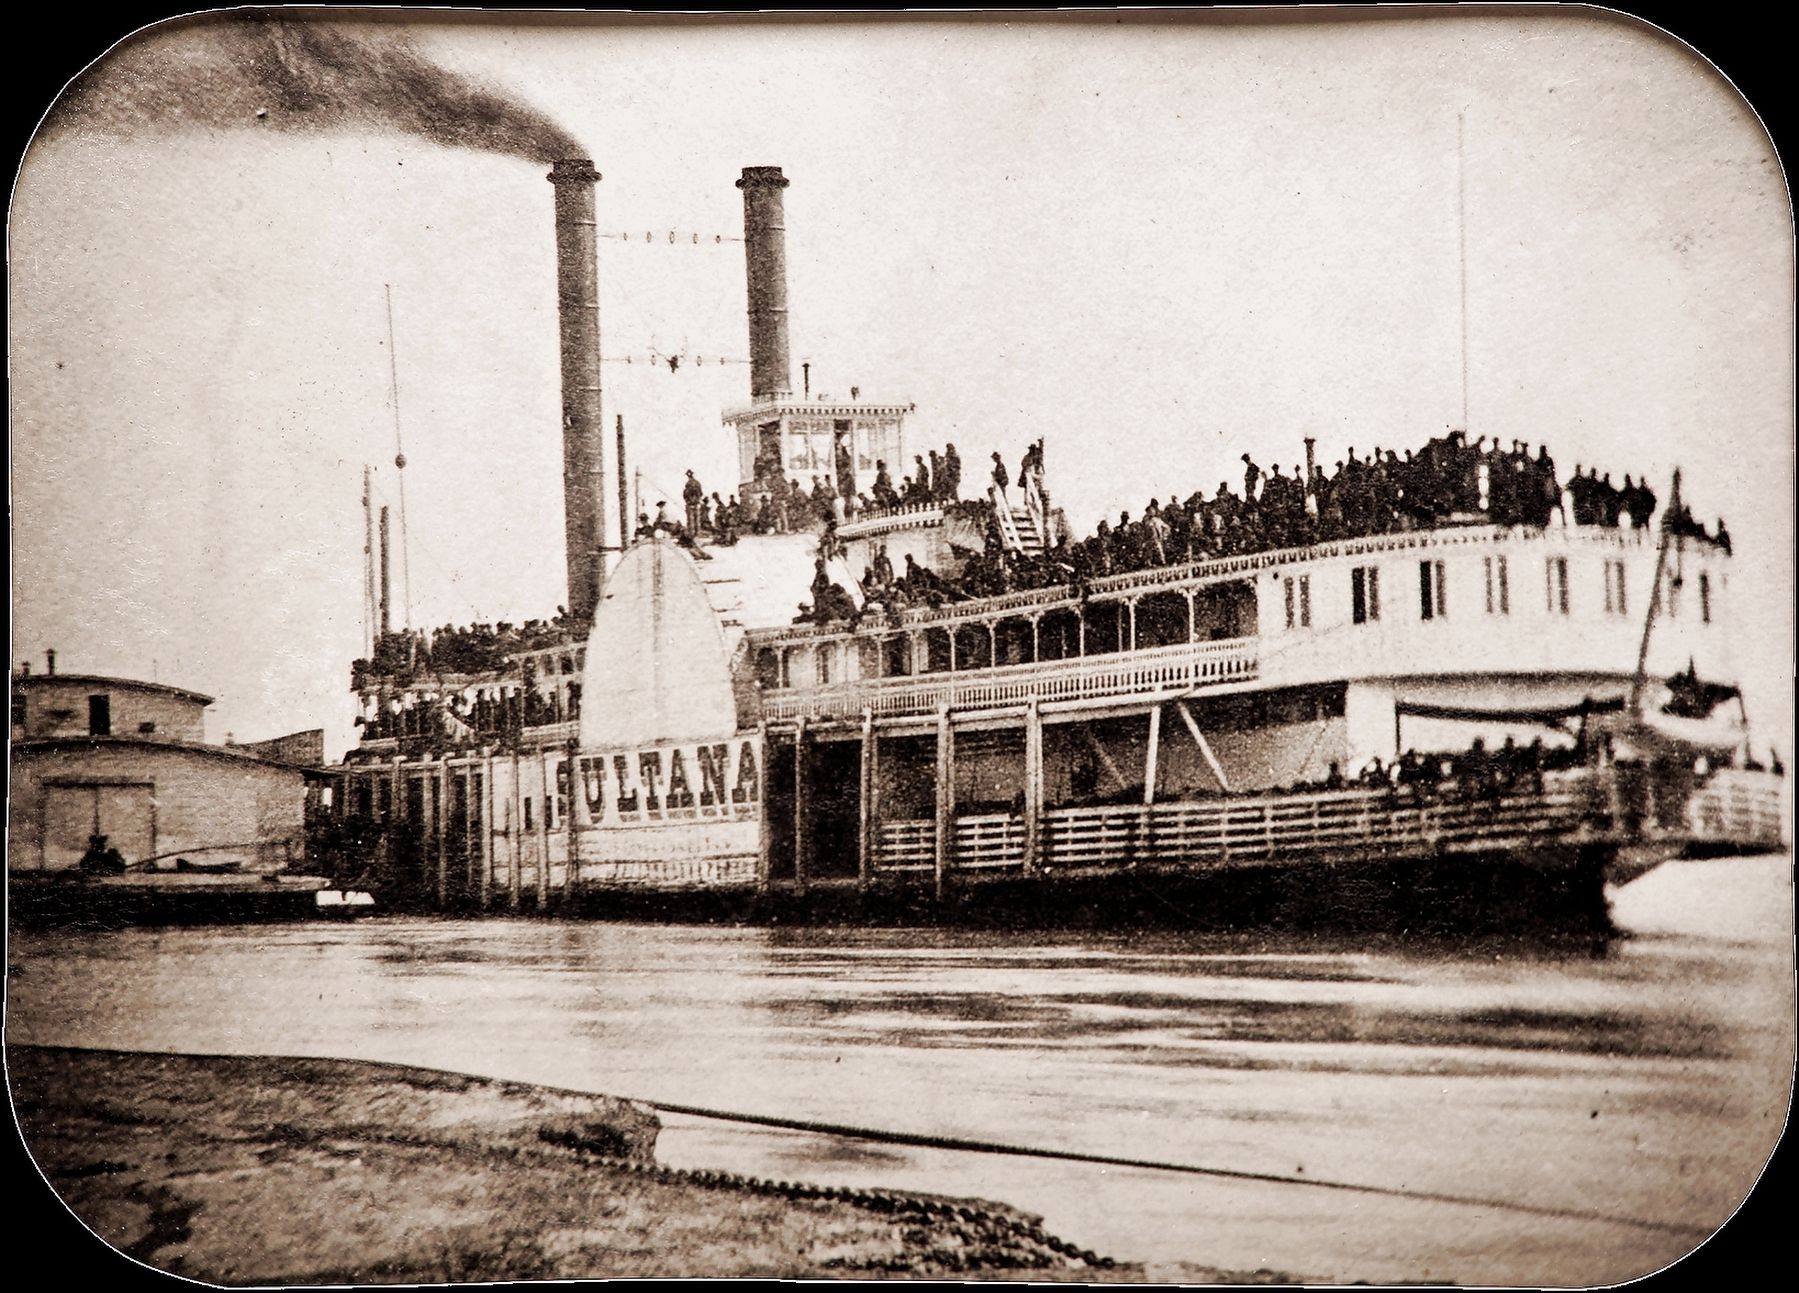 Photo of the Sultana taken at Helena, Arkansas, on April 26, 1865, a day before she was destroyed. image. Click for full size.